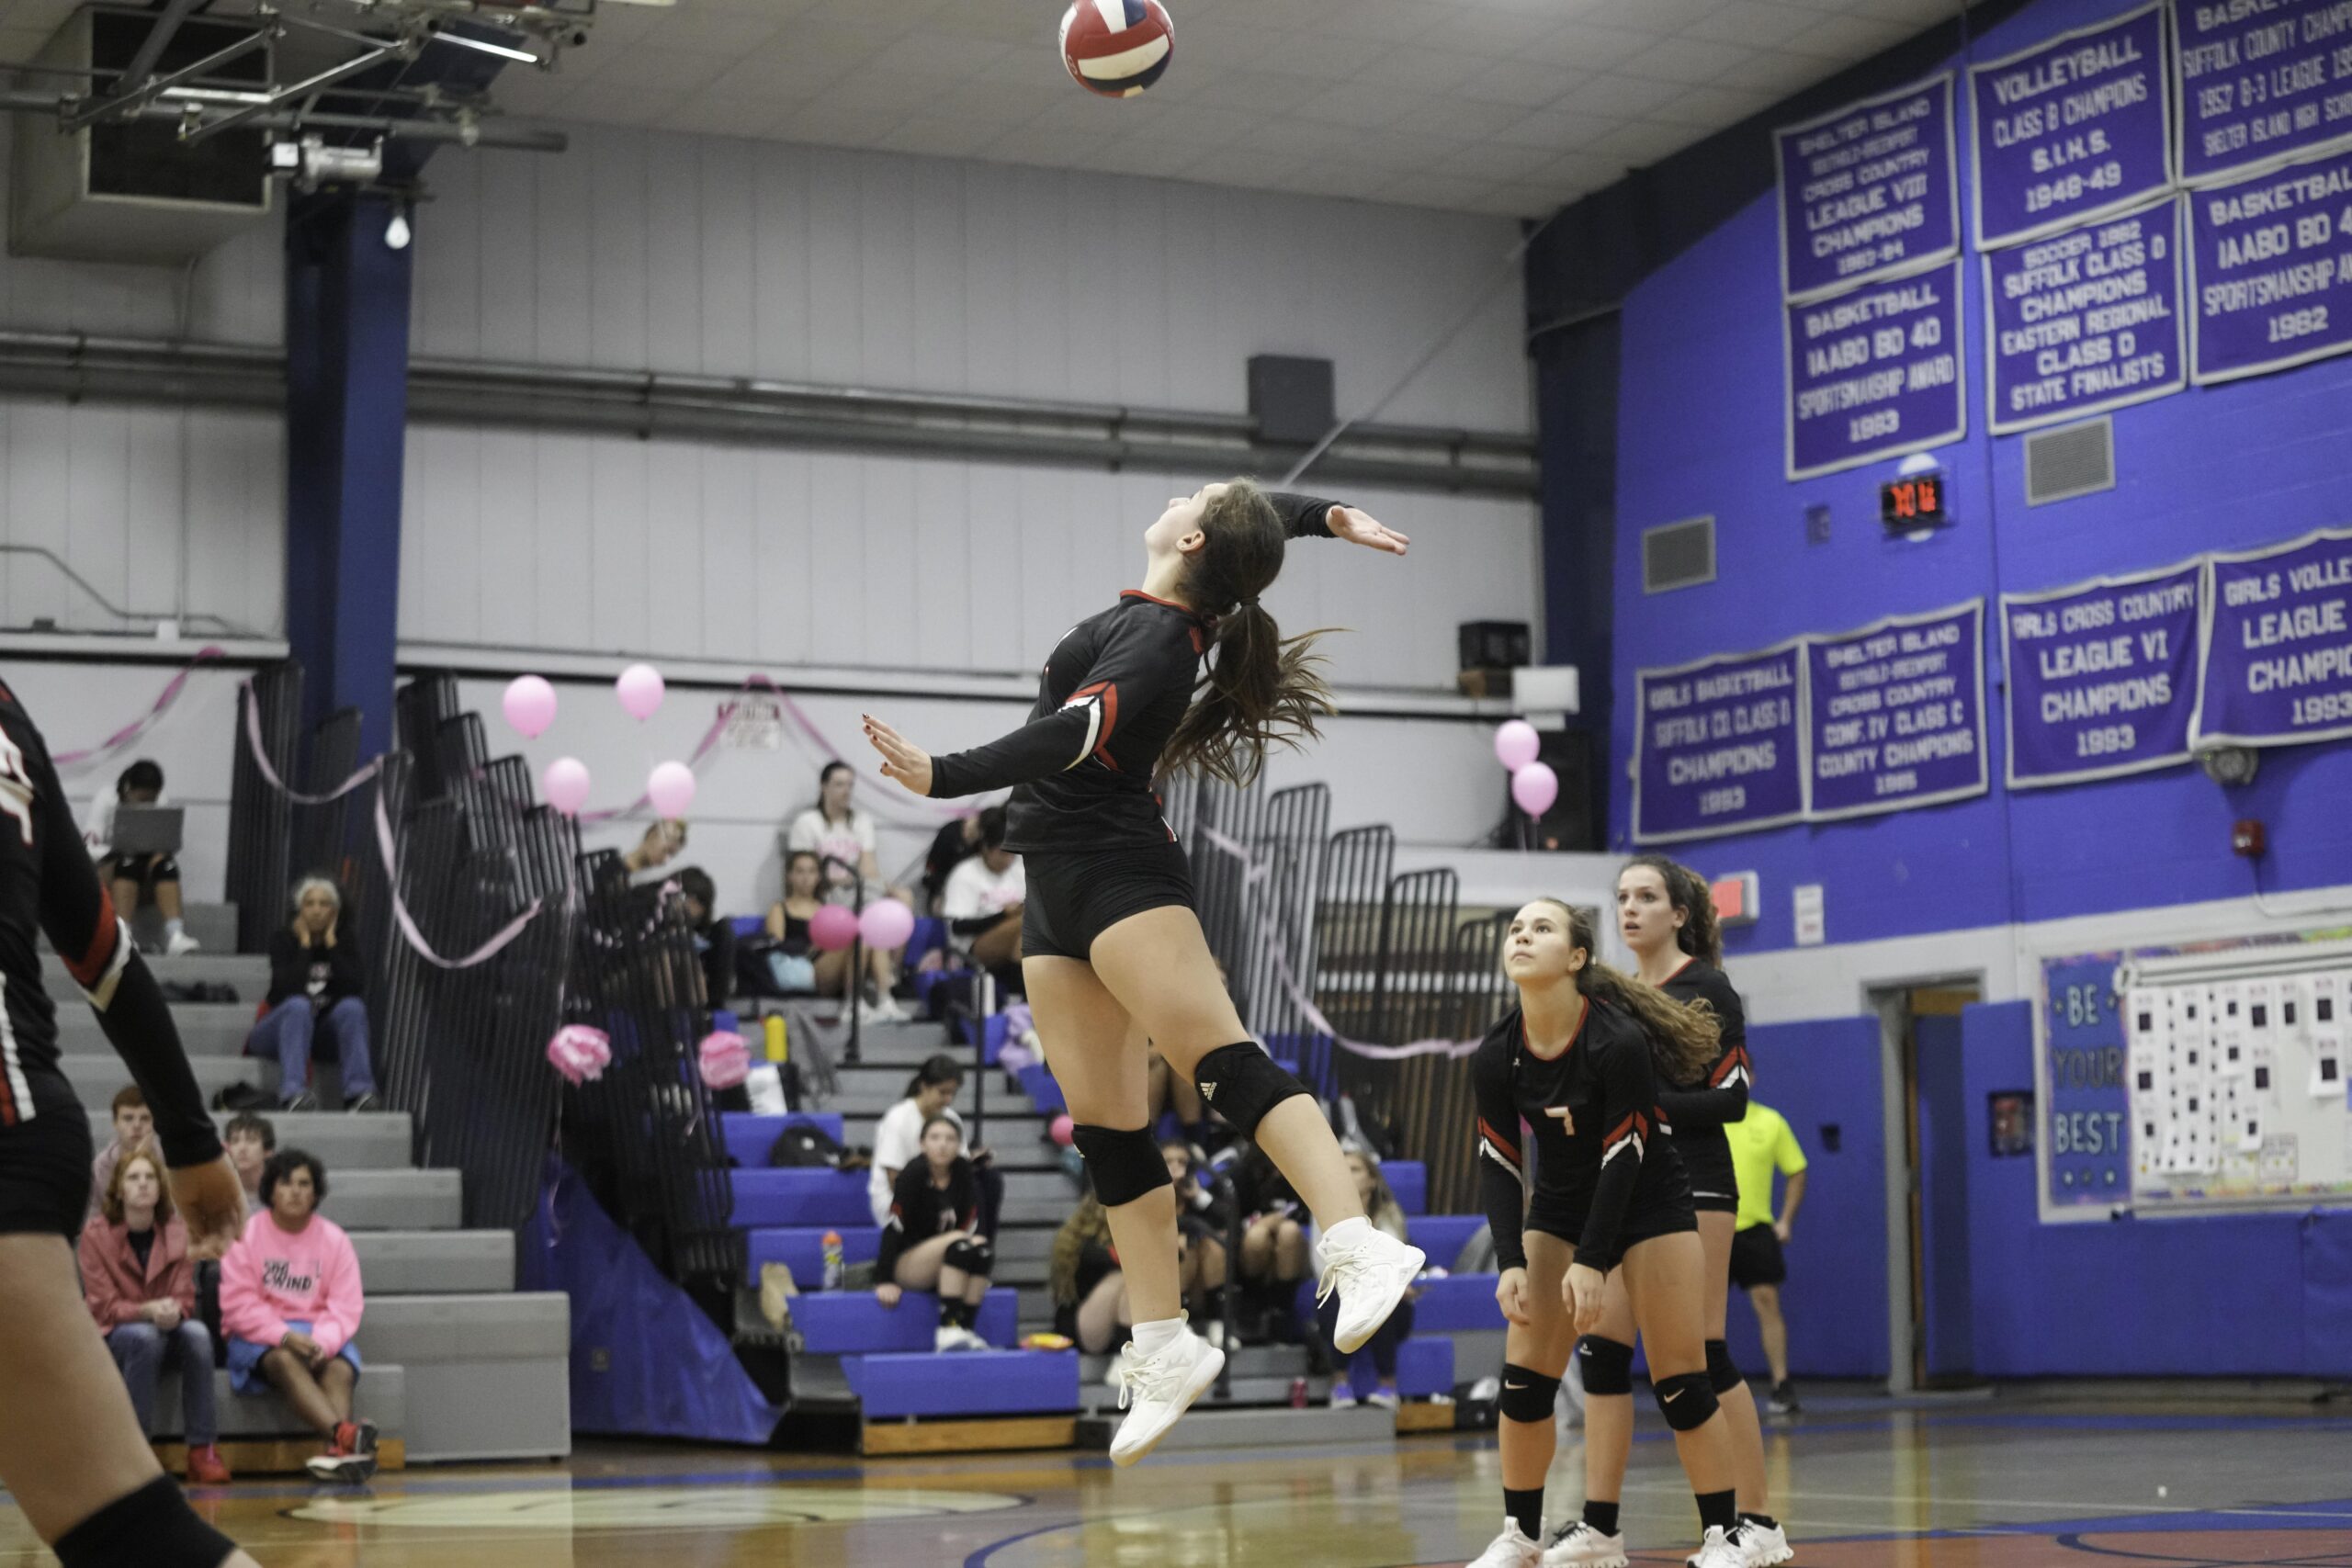 Pierson senior Grace Flanagan leaps to get the ball over the net.    RON ESPOSITO